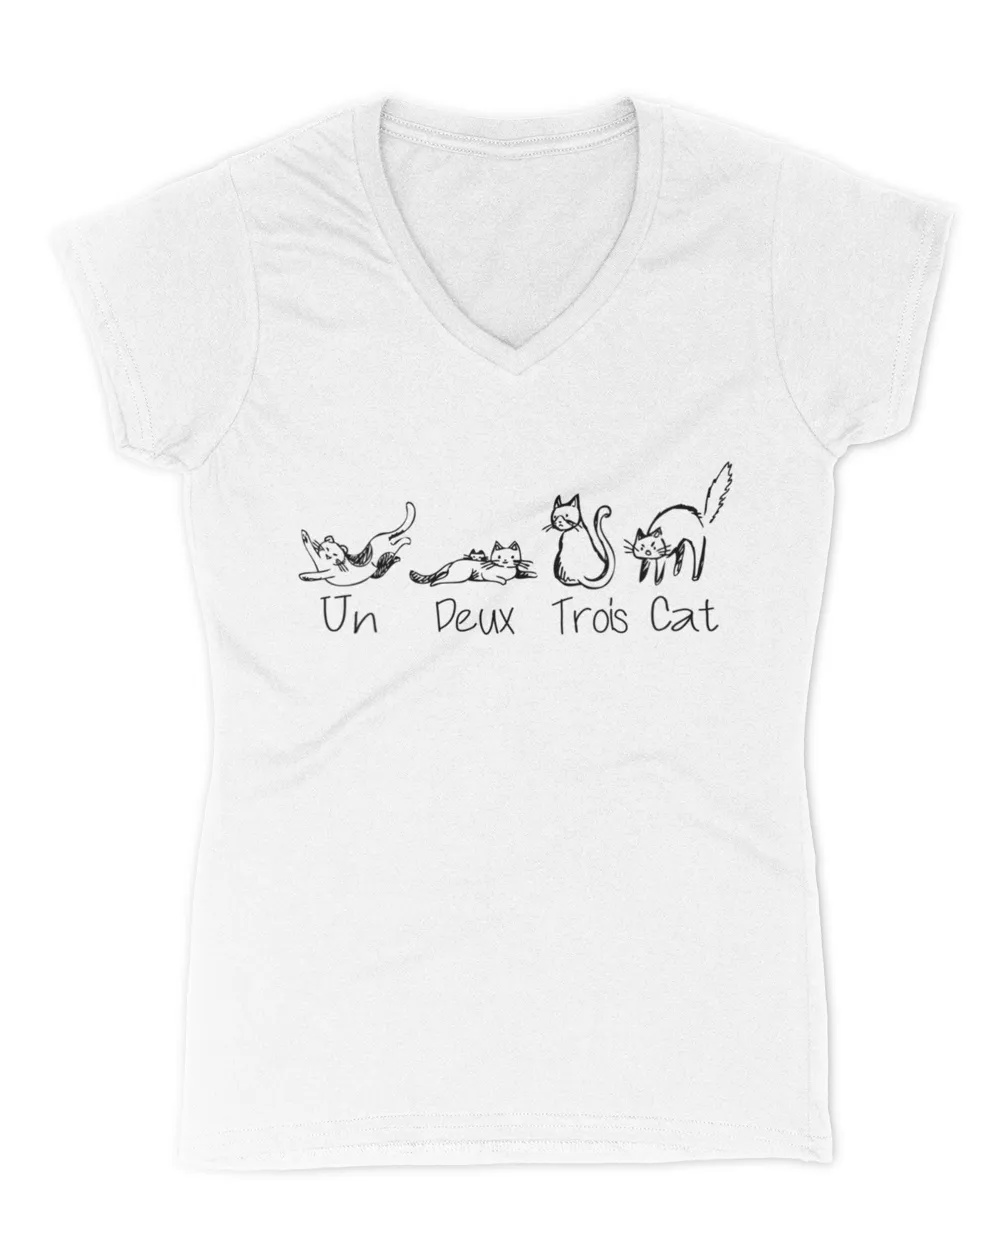 Un Deux Trois Cat Tee Cute Kitten Funny French Cat lover HOC110423A16